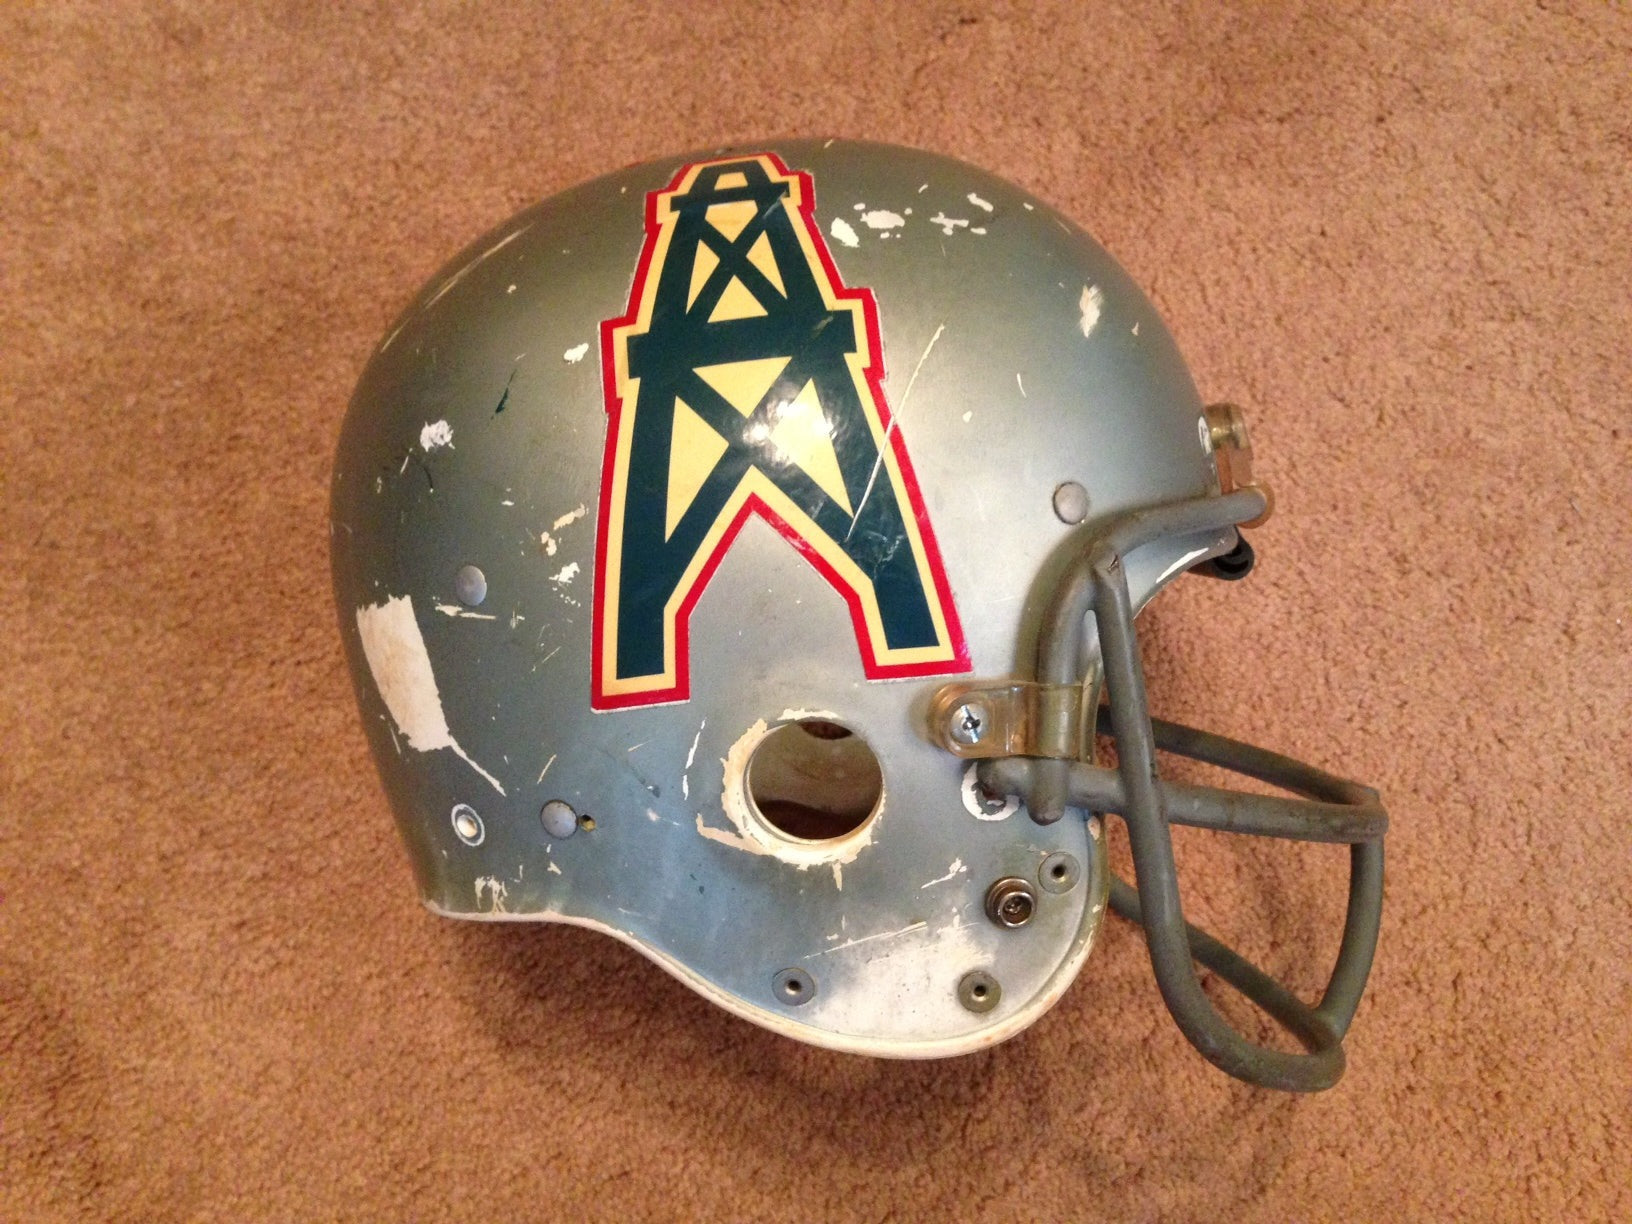 Game Used NFL, Riddell Kra-Lite, and Miscellaneous Helmets: Houston Oilers  Authentic Vintage NFL Game Used Football Helmet circa 1970 Autographed by